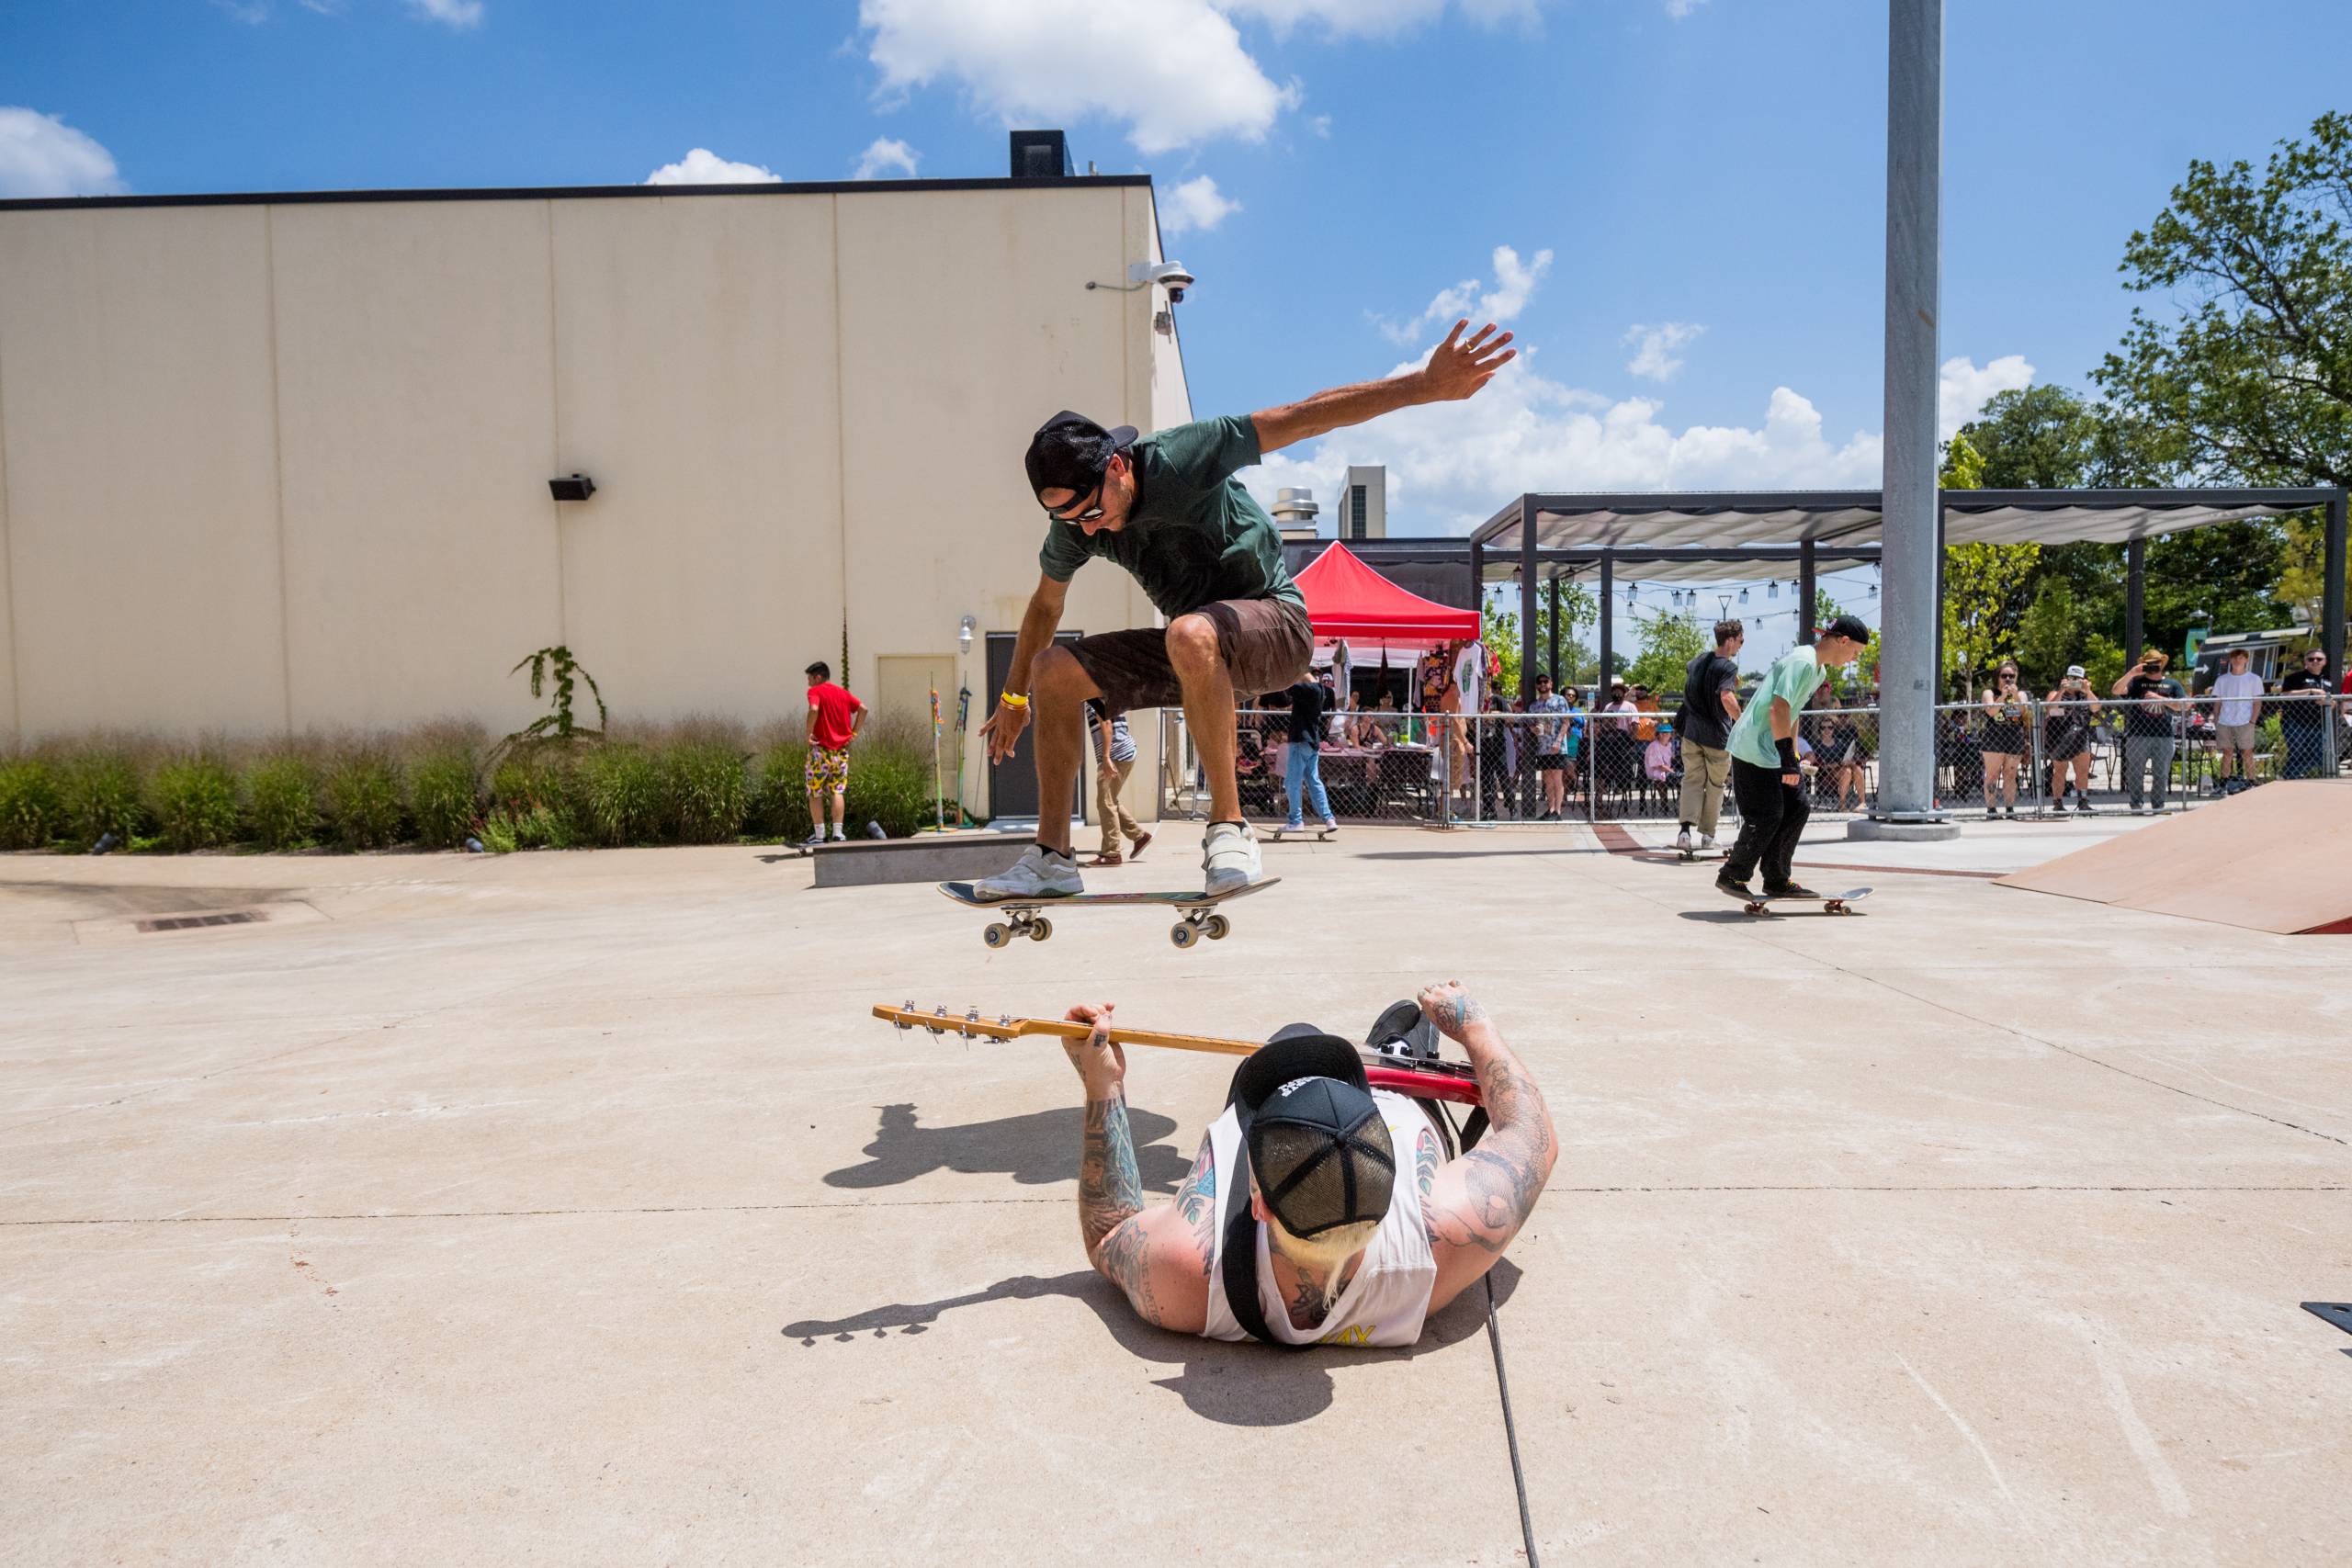 a man on a skateboard jumps over a man with a guitar laying on the ground